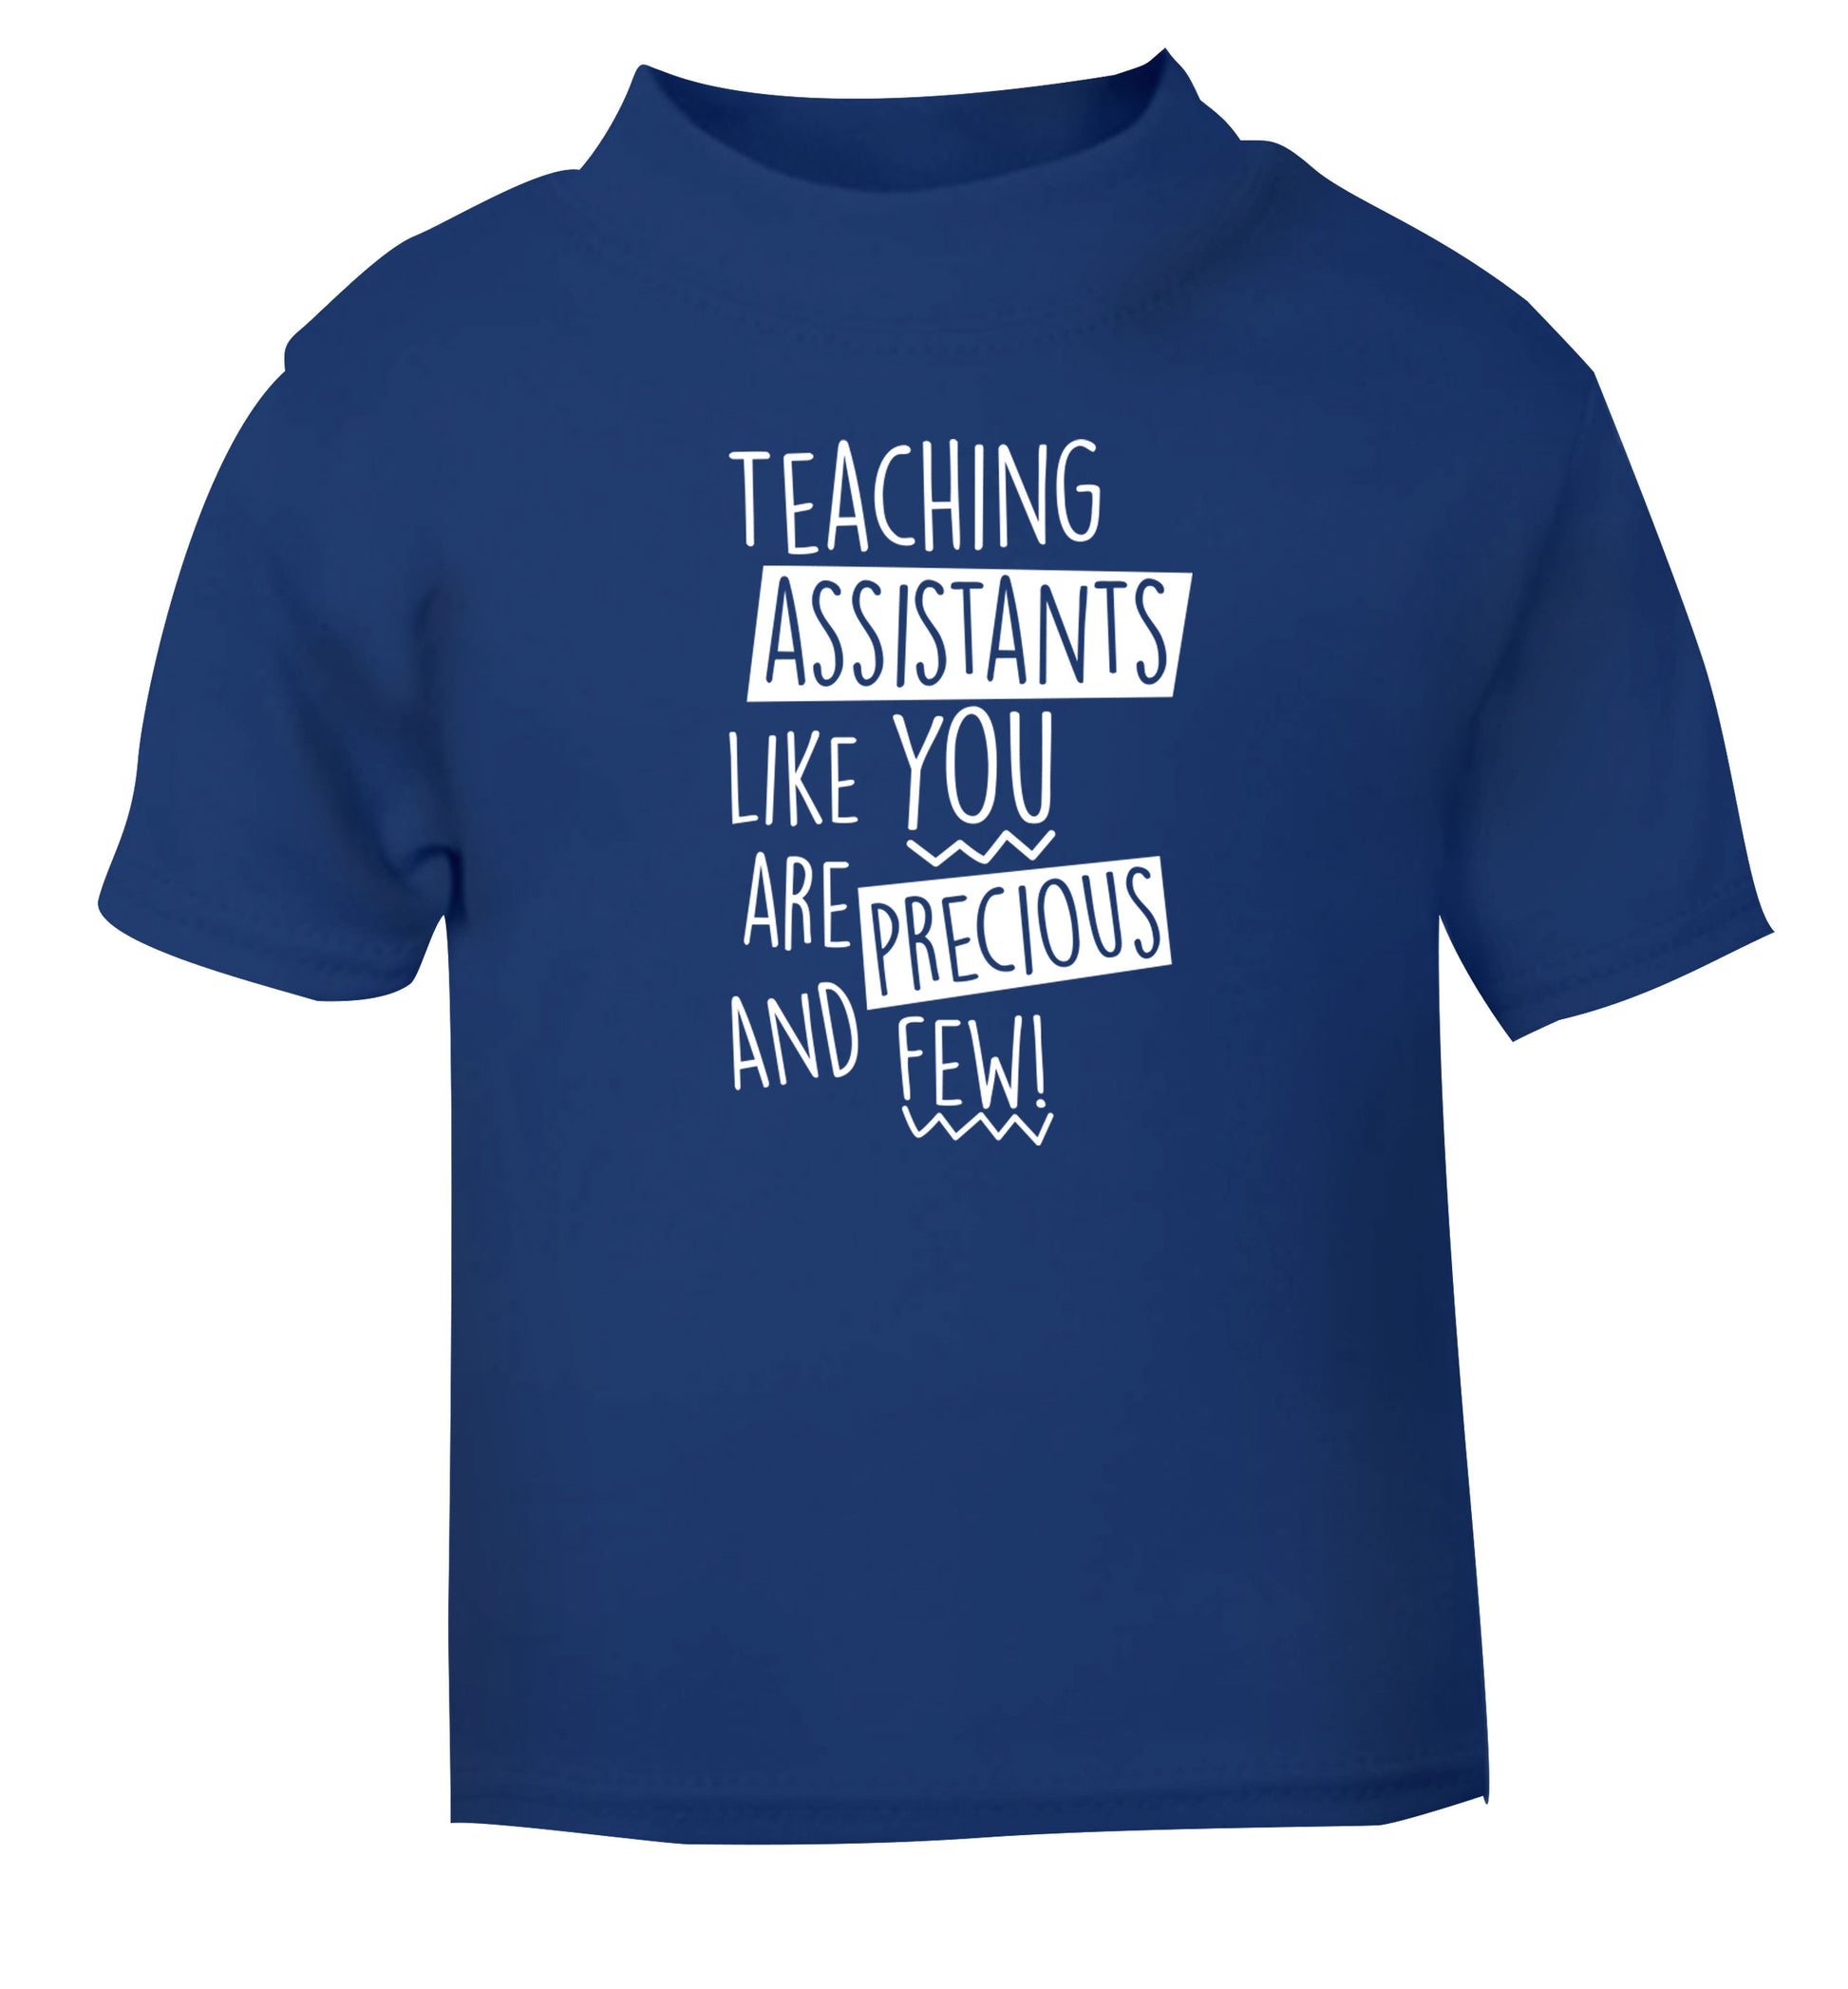 Teaching assistants like you are previous and few! blue Baby Toddler Tshirt 2 Years